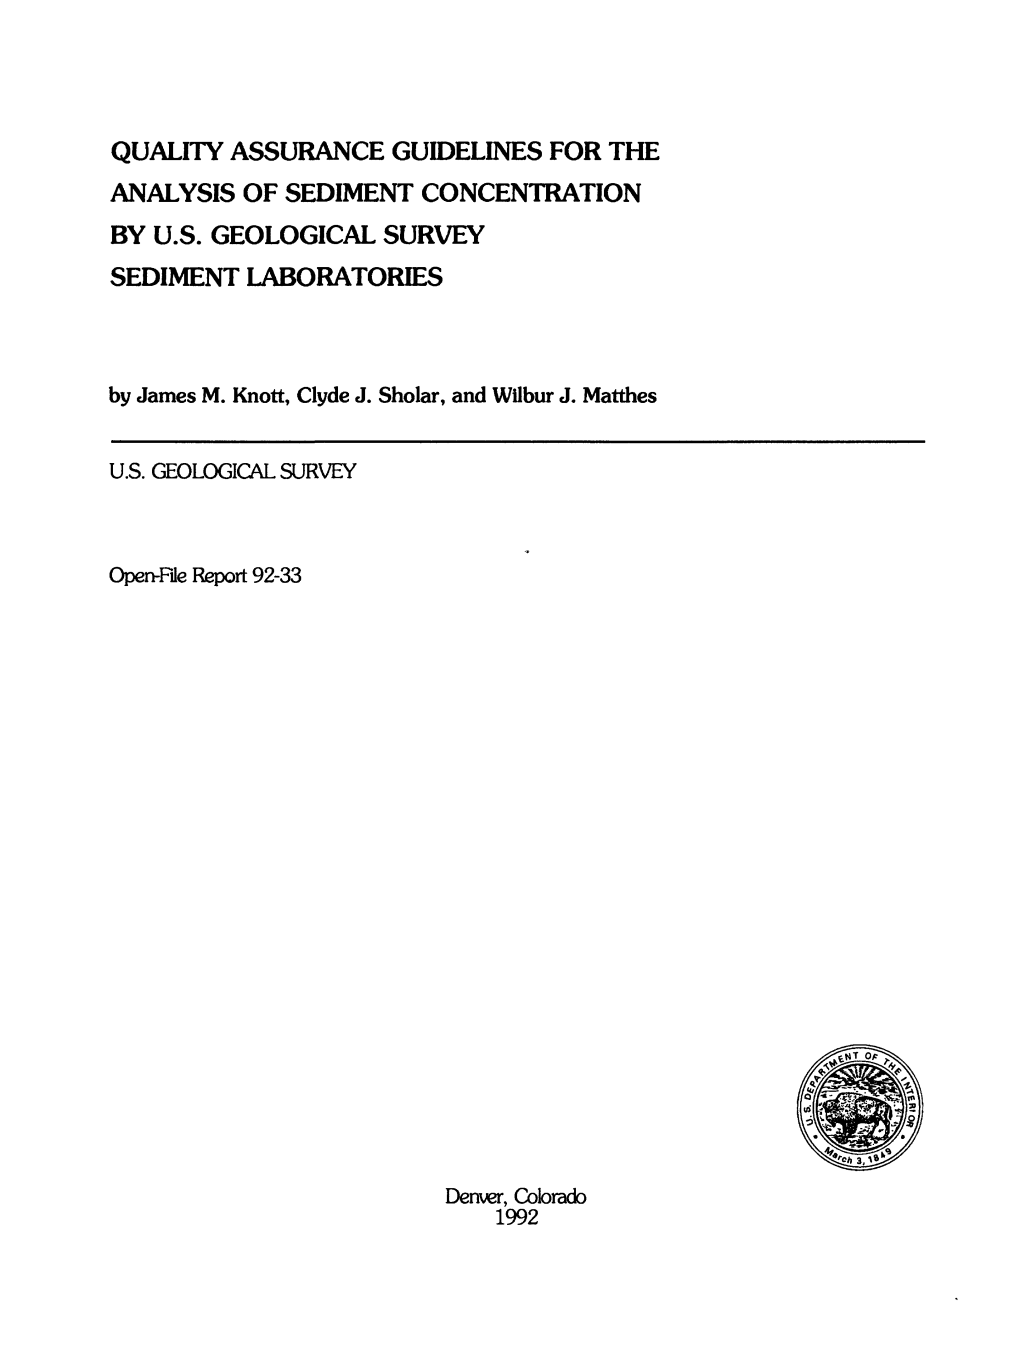 Quality Assurance Guidelines for the Analysis of Sediment Concentration by U.S